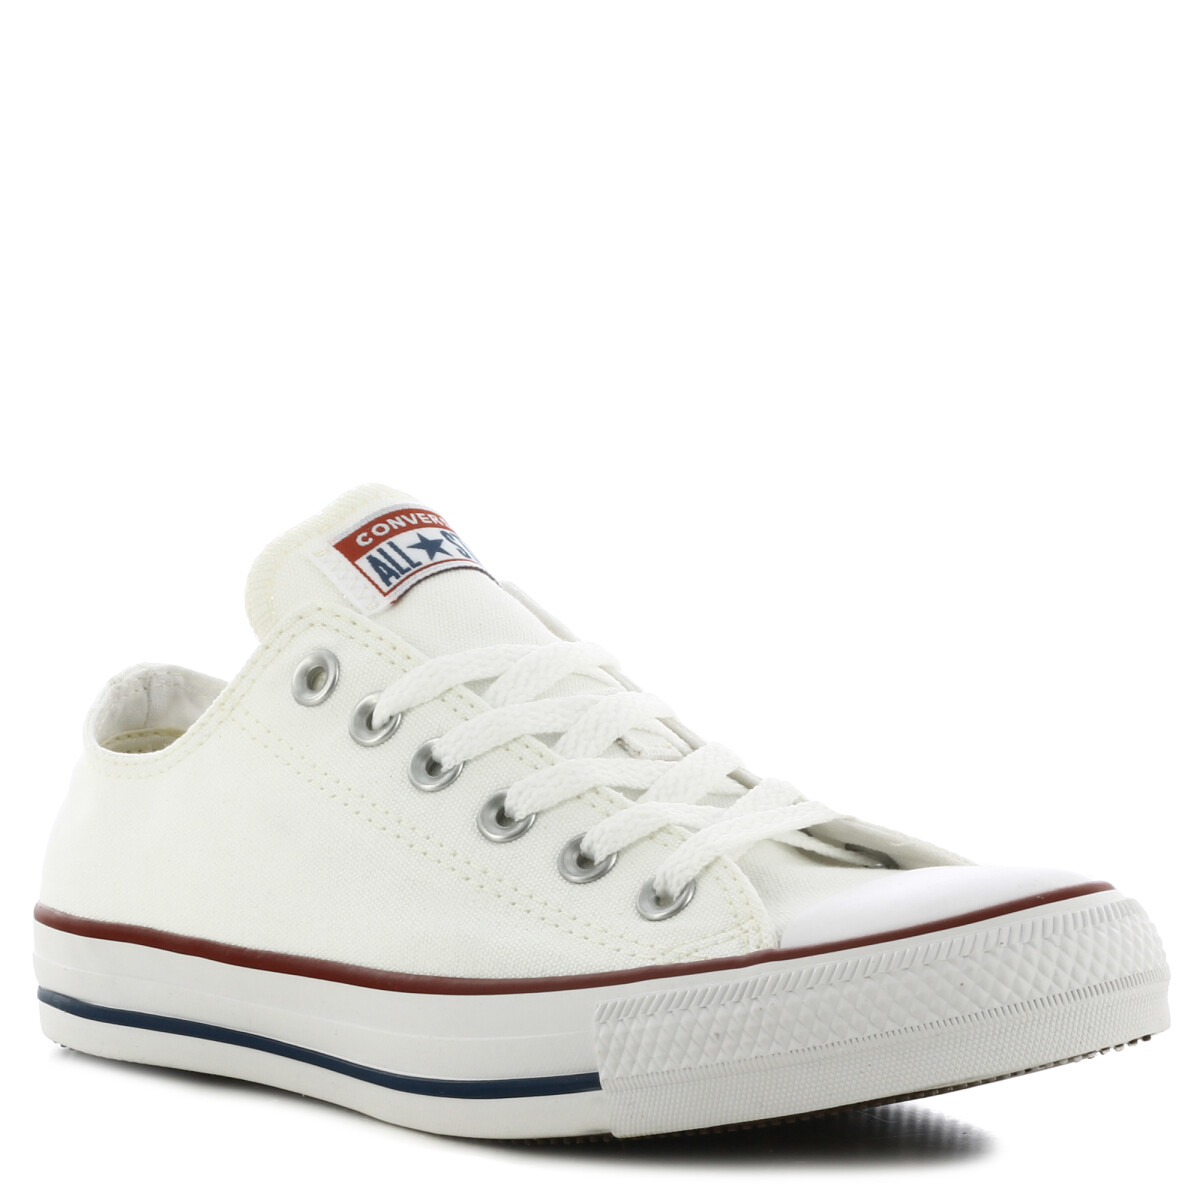 Classic - Basket Low Converse - All Star - White 